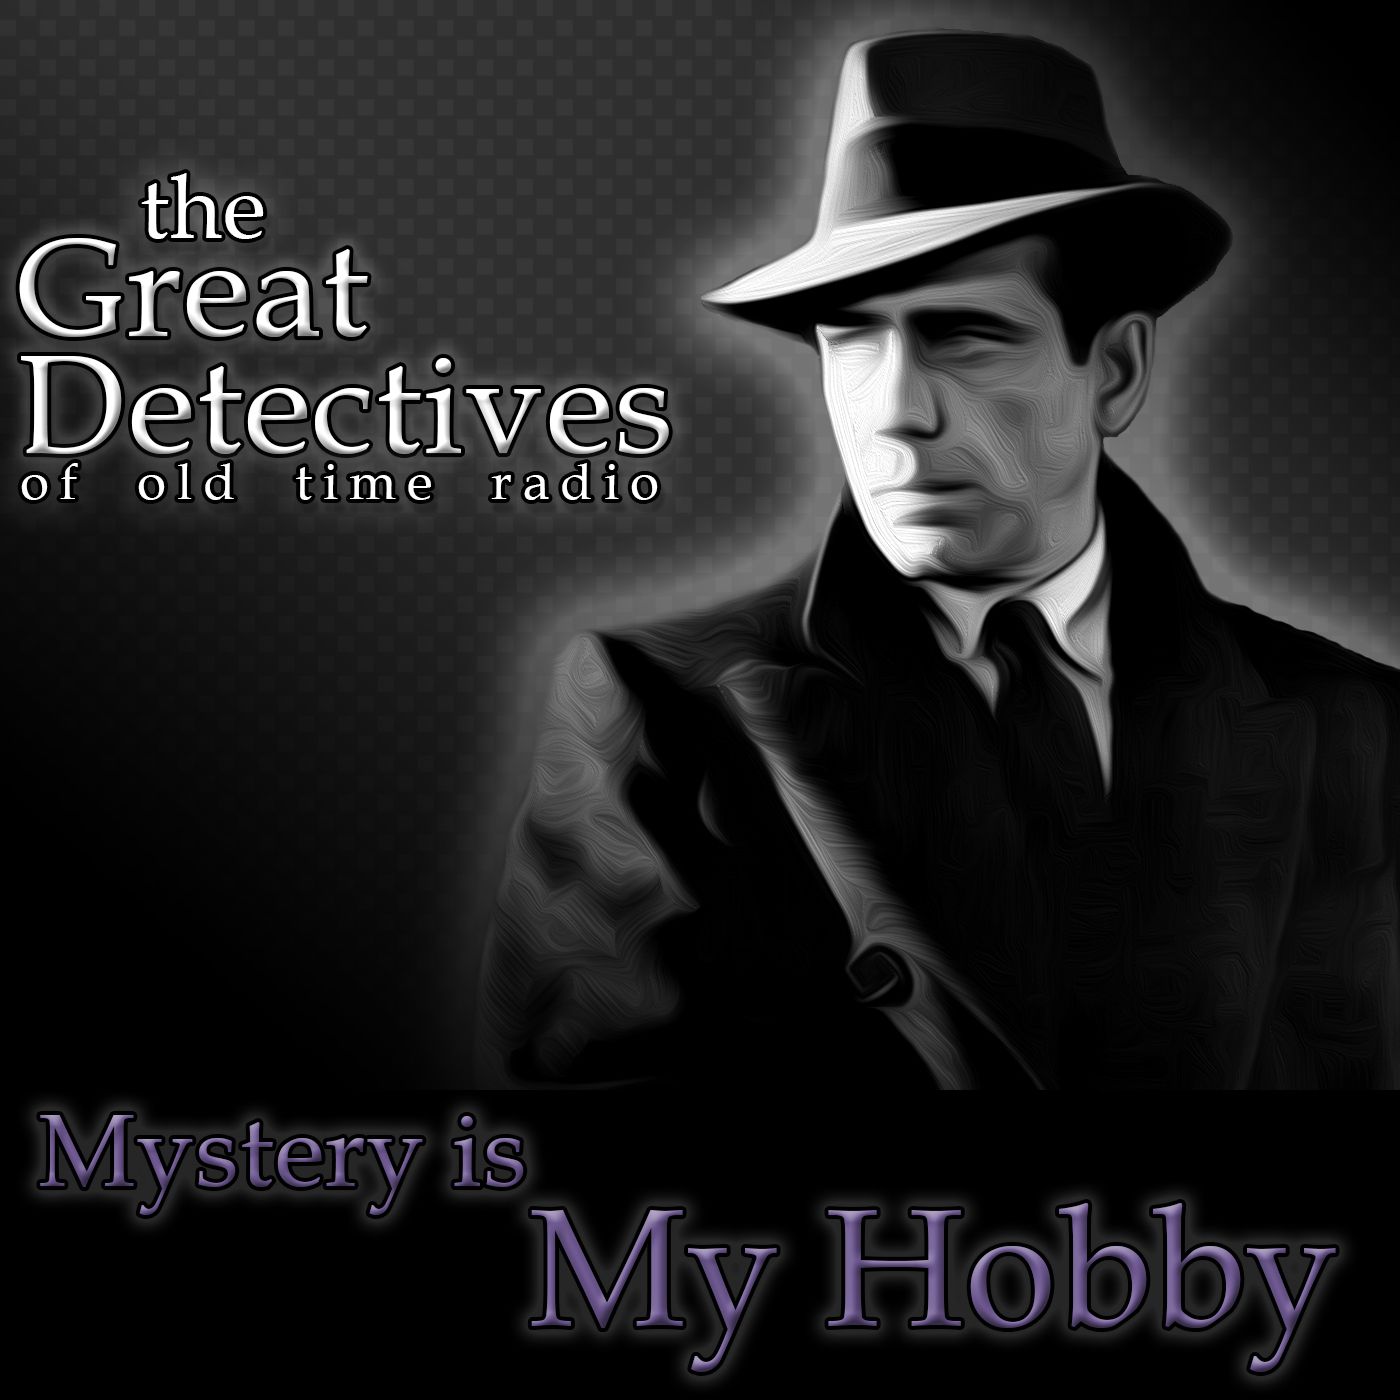 Mystery is My Hobby – The Great Detectives of Old Time Radio